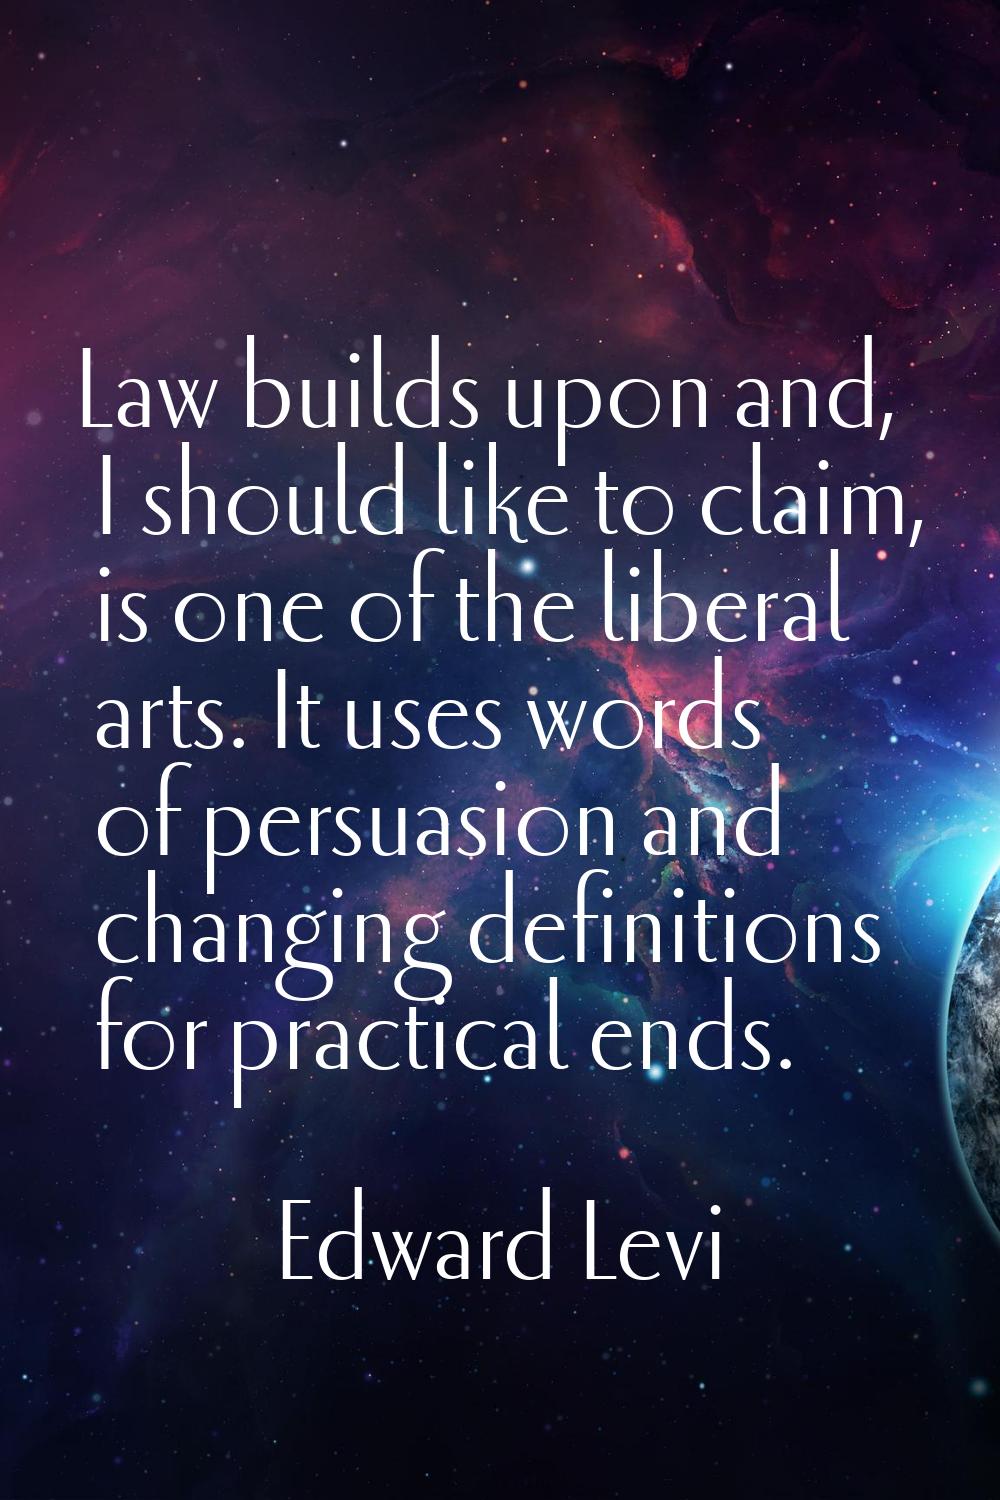 Law builds upon and, I should like to claim, is one of the liberal arts. It uses words of persuasio